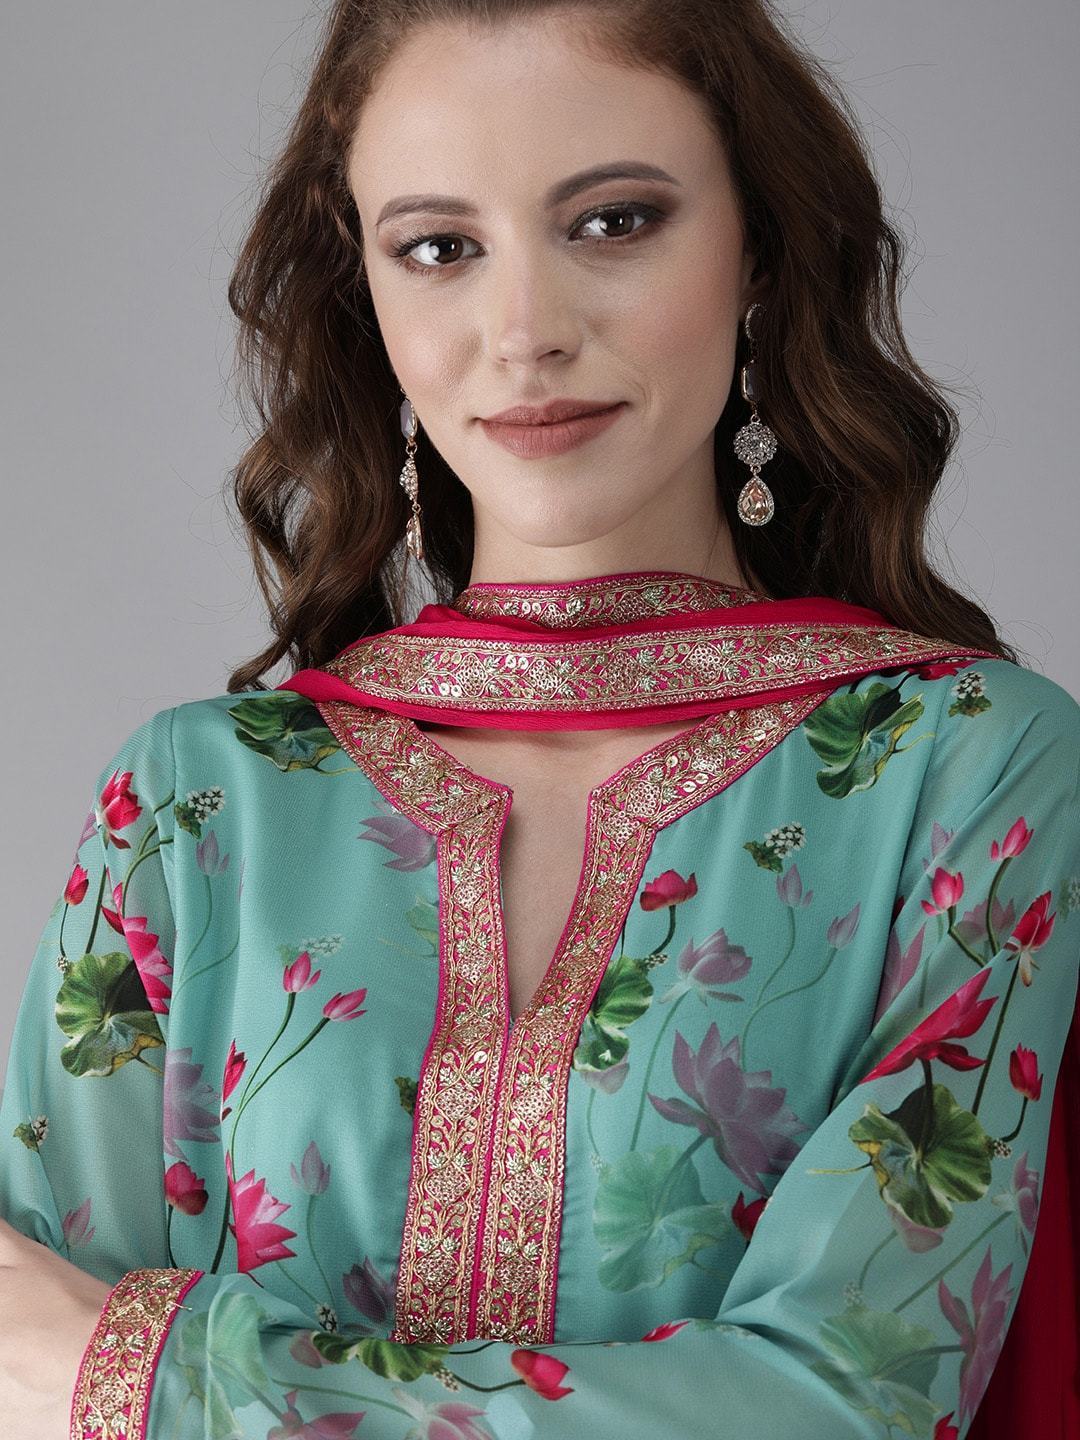 Women's  Turquoise Blue & Pink Printed Kurta with Palazzos & Dupatta - Final Clearance Sale